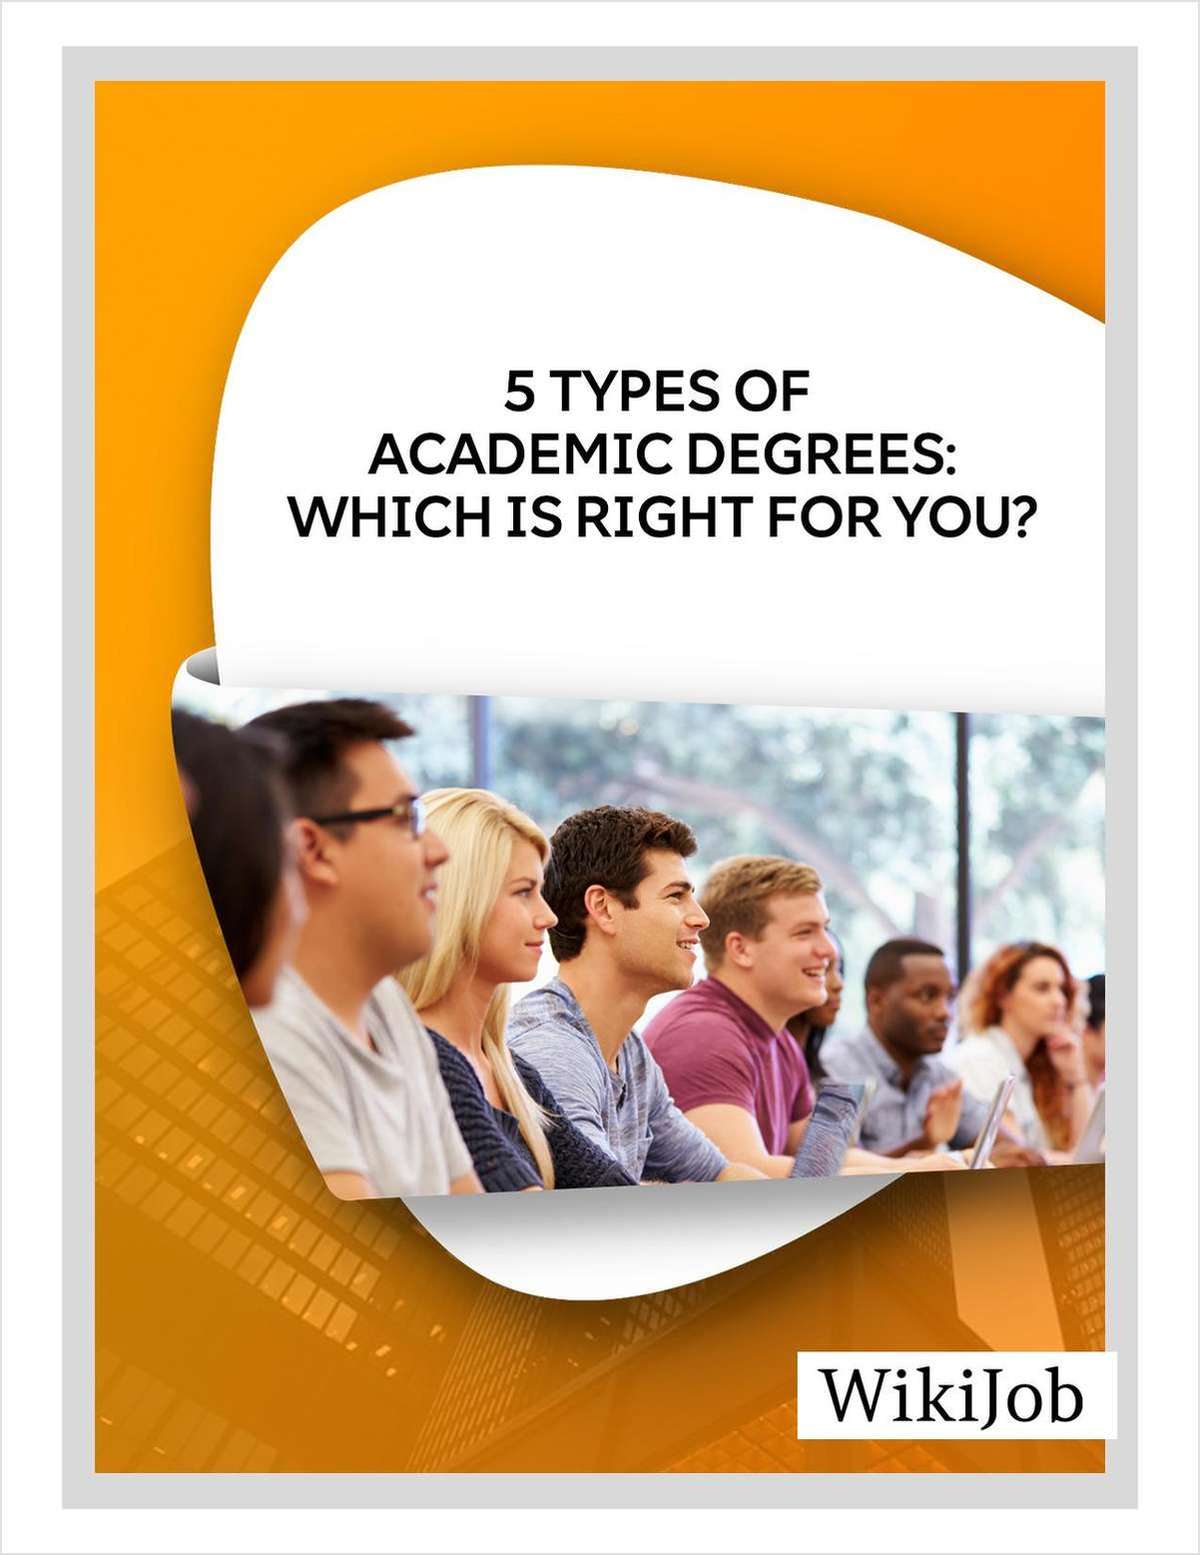 5 Types of Academic Degrees: Which Is Right for You?